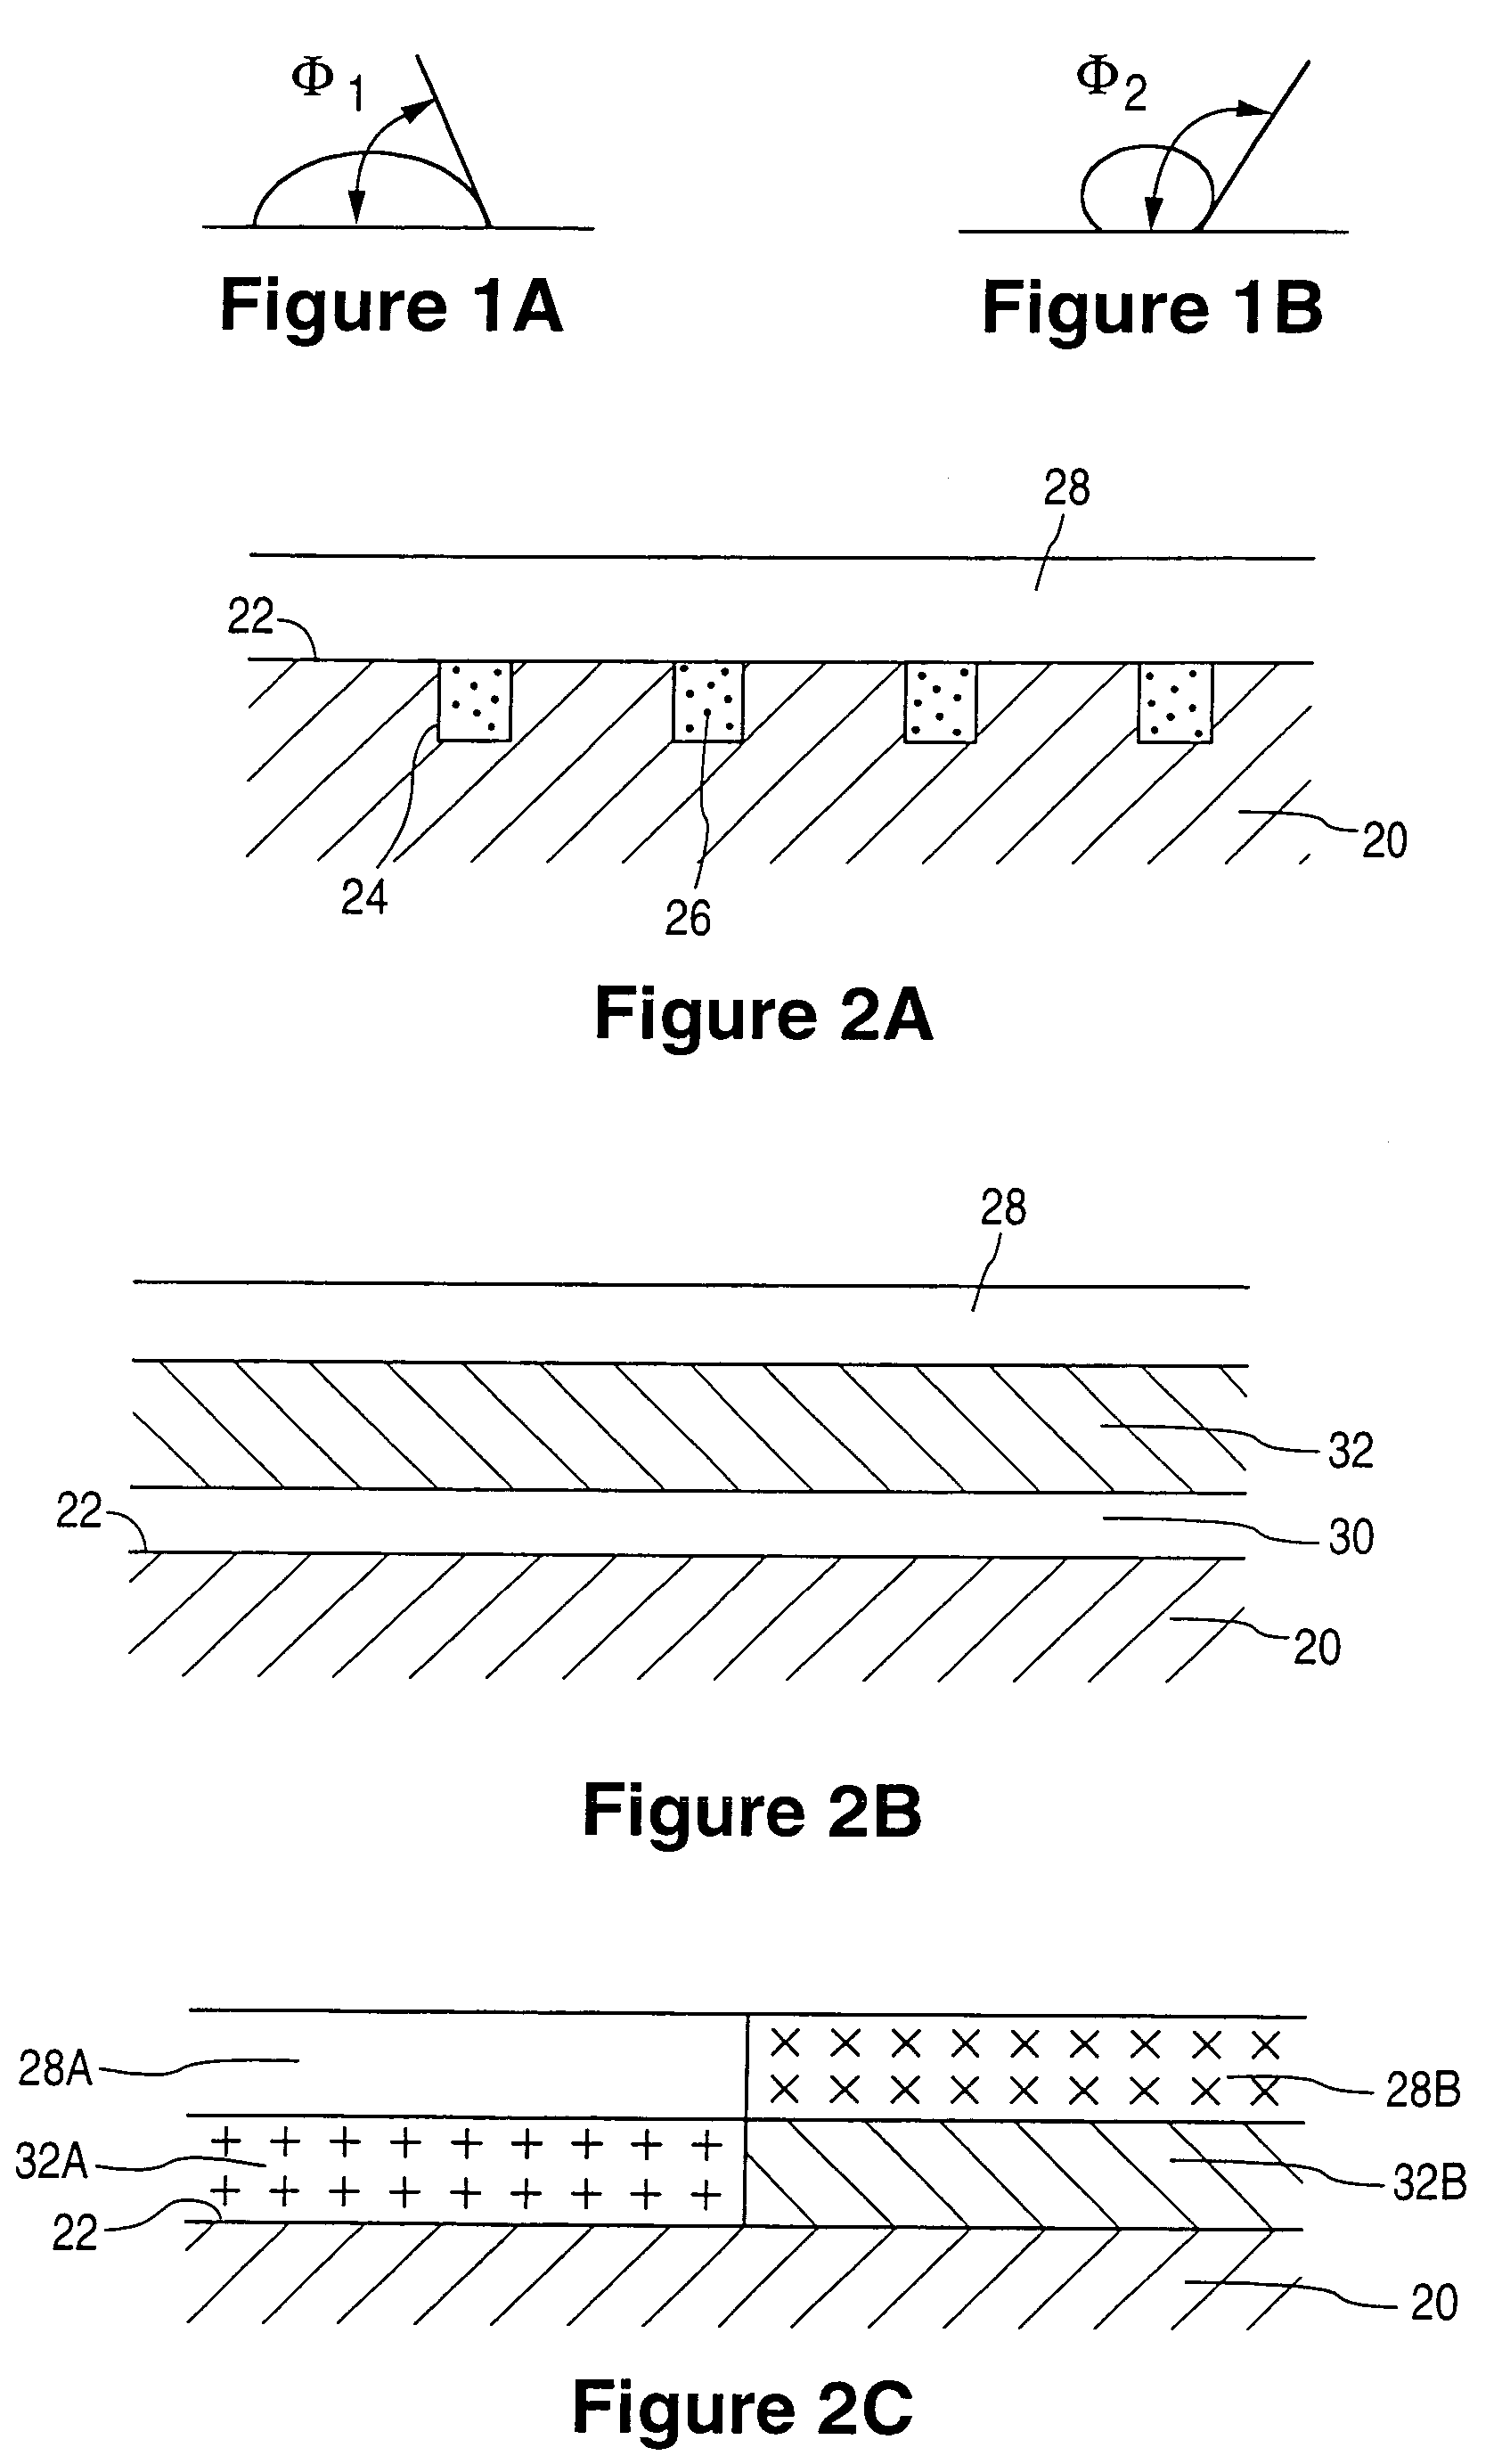 Rate-reducing membrane for release of an agent